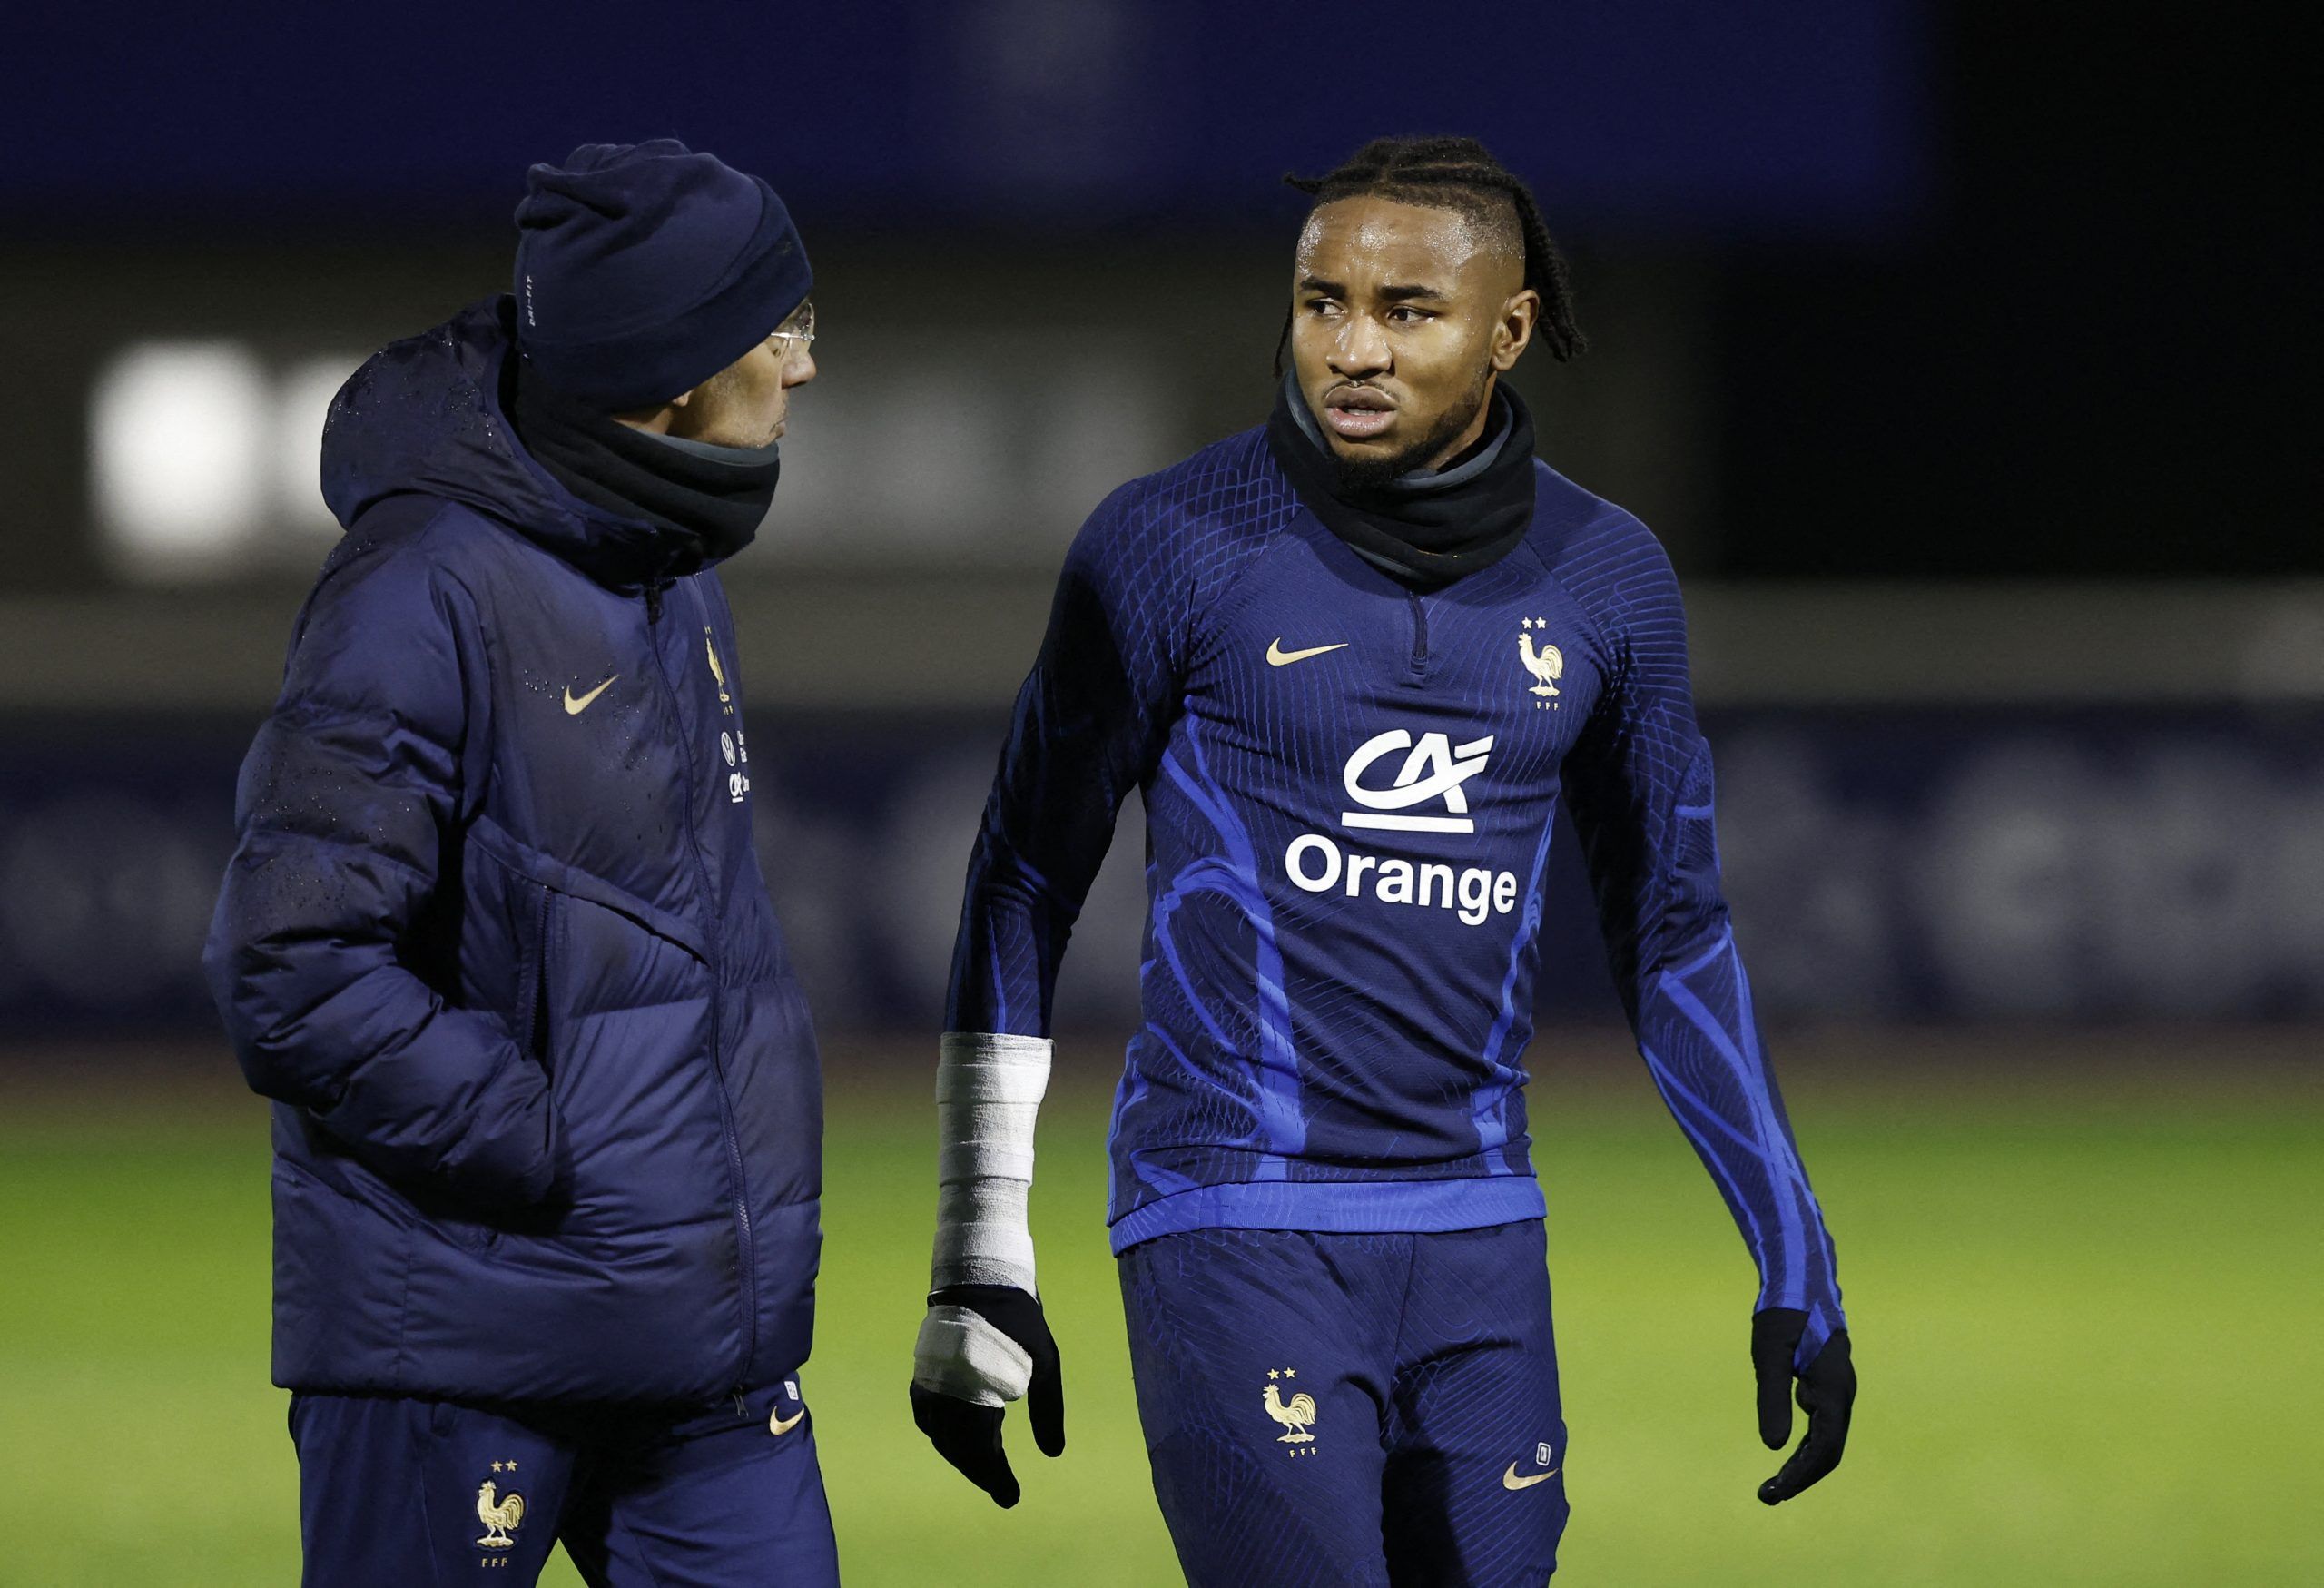 Soccer Football - FIFA World Cup Qatar 2022 - France team Training - INF Clairefontaine, Clairefontaine-en-Yvelines, France - November 15, 2022 France's Christopher Nkunku during training REUTERS/Benoit Tessier